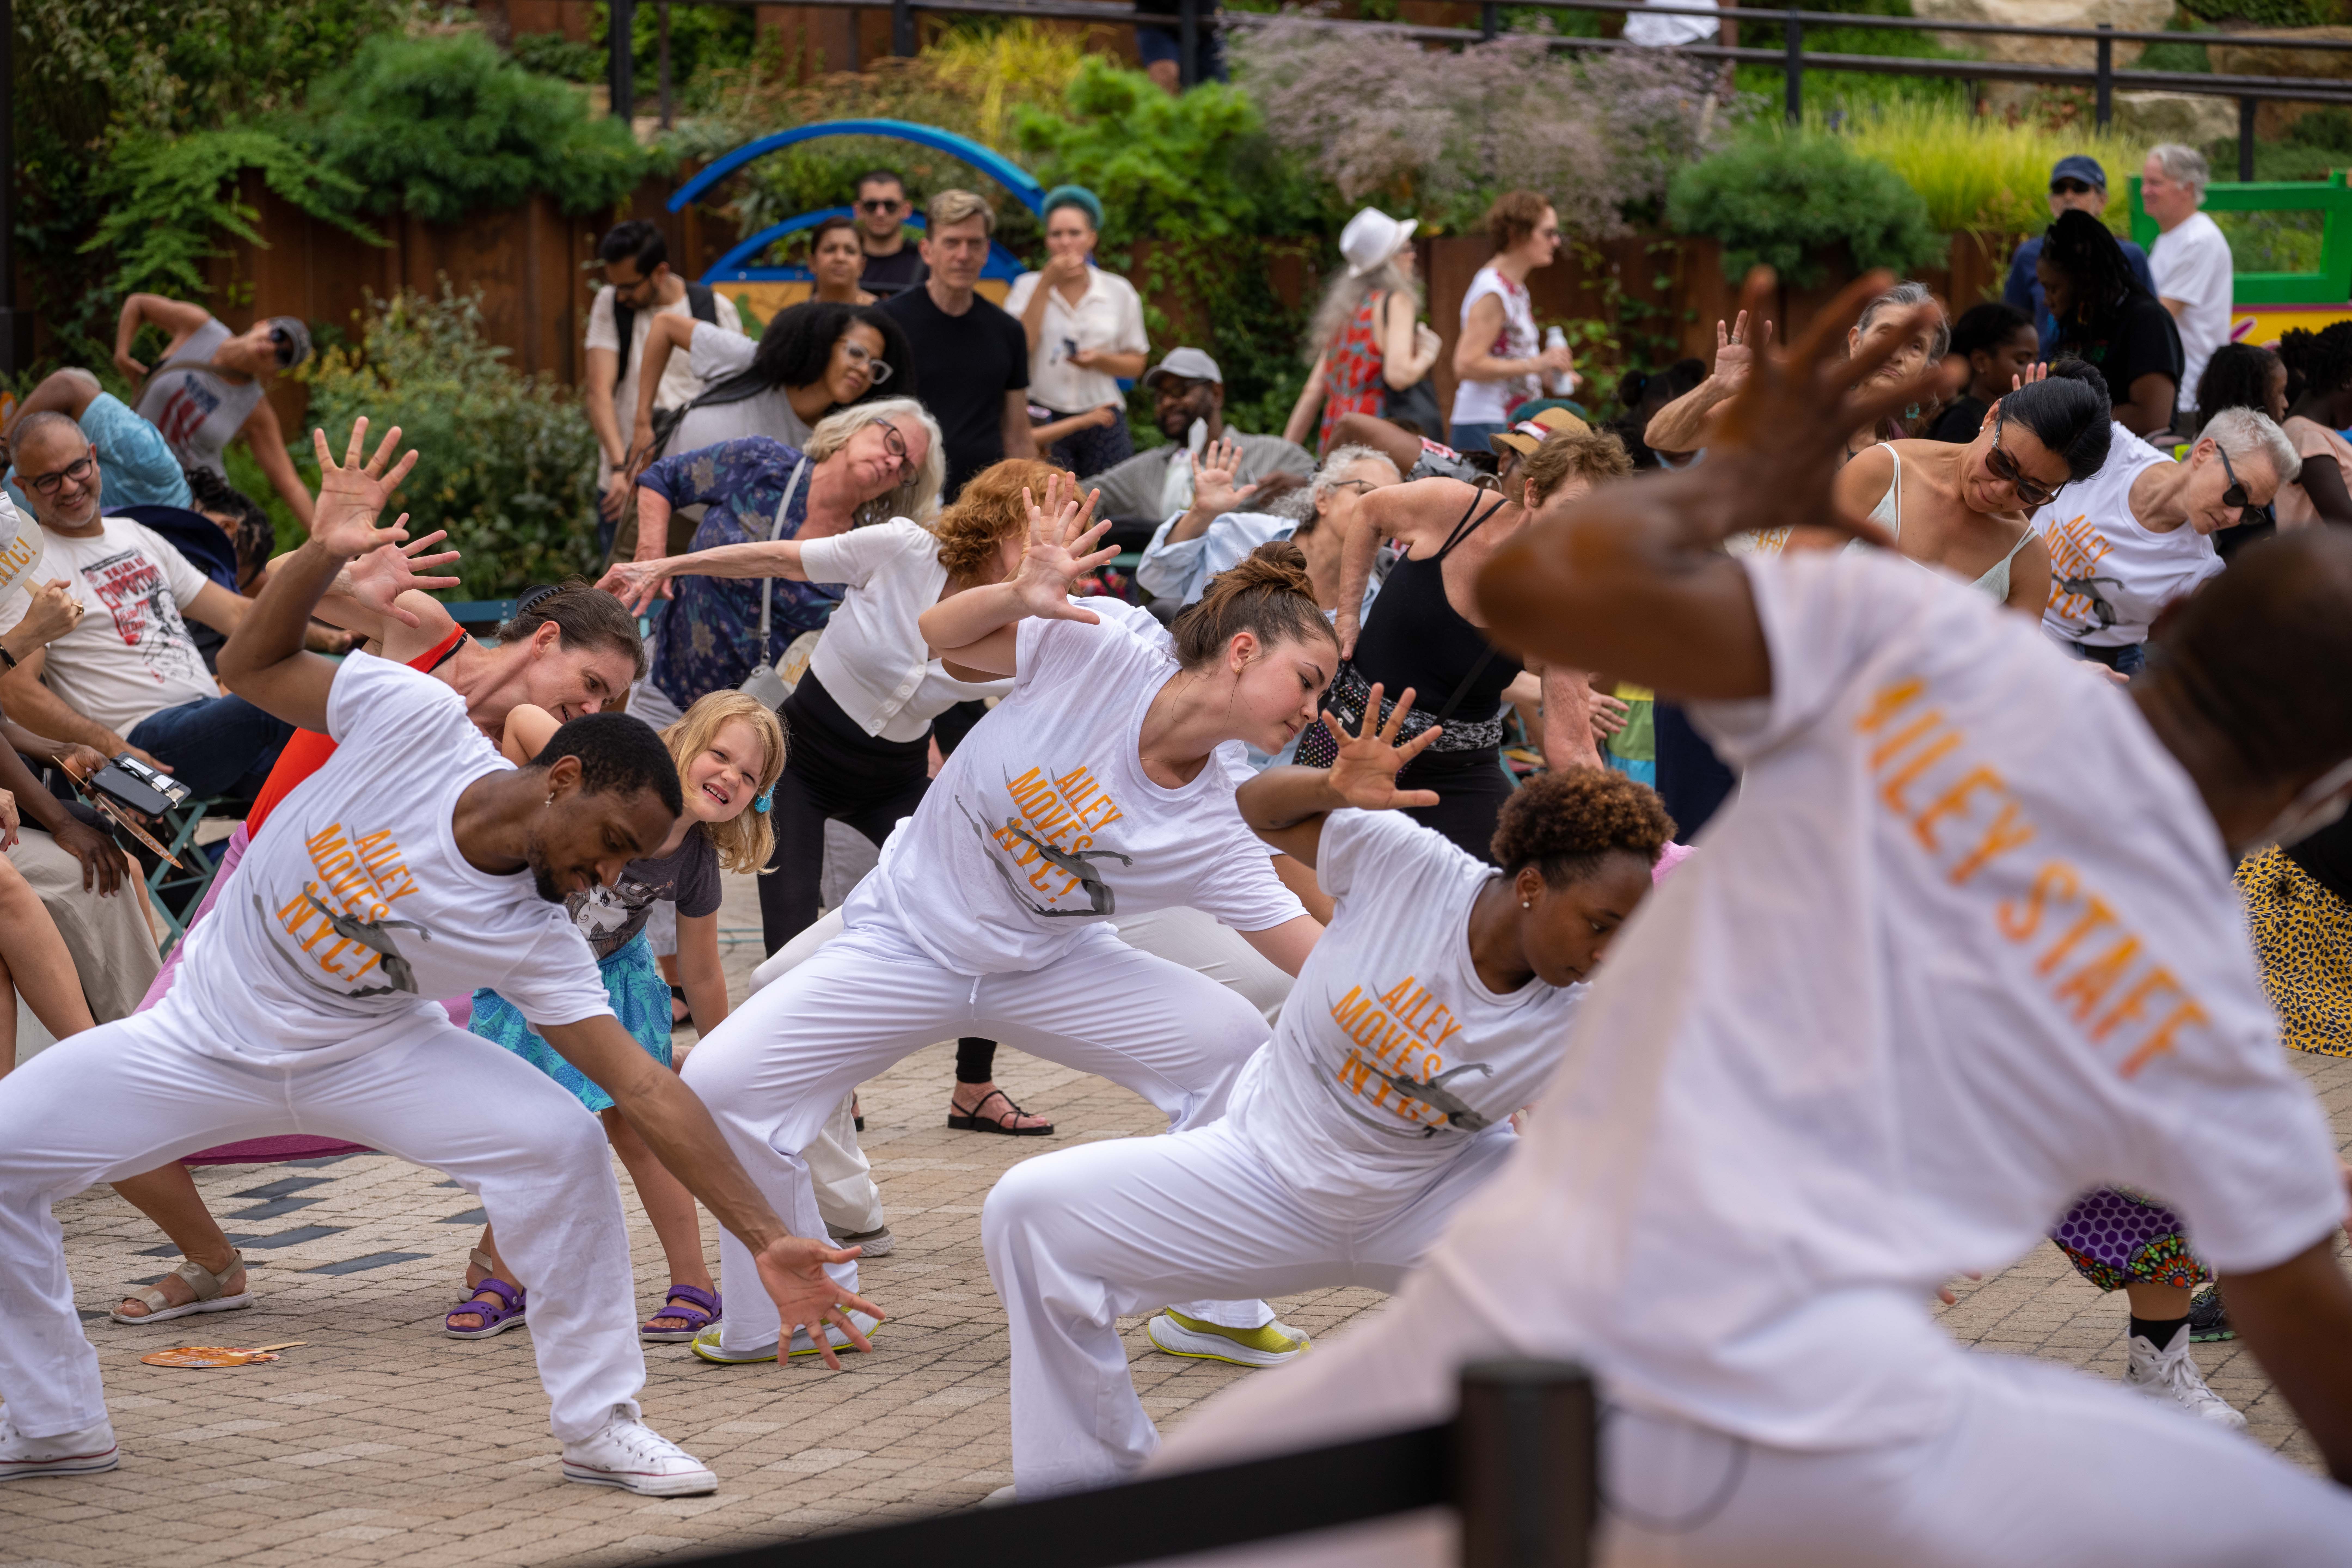 A group of dancers lean to their right showing park visitors how to do a dance move in front of lush greenery.